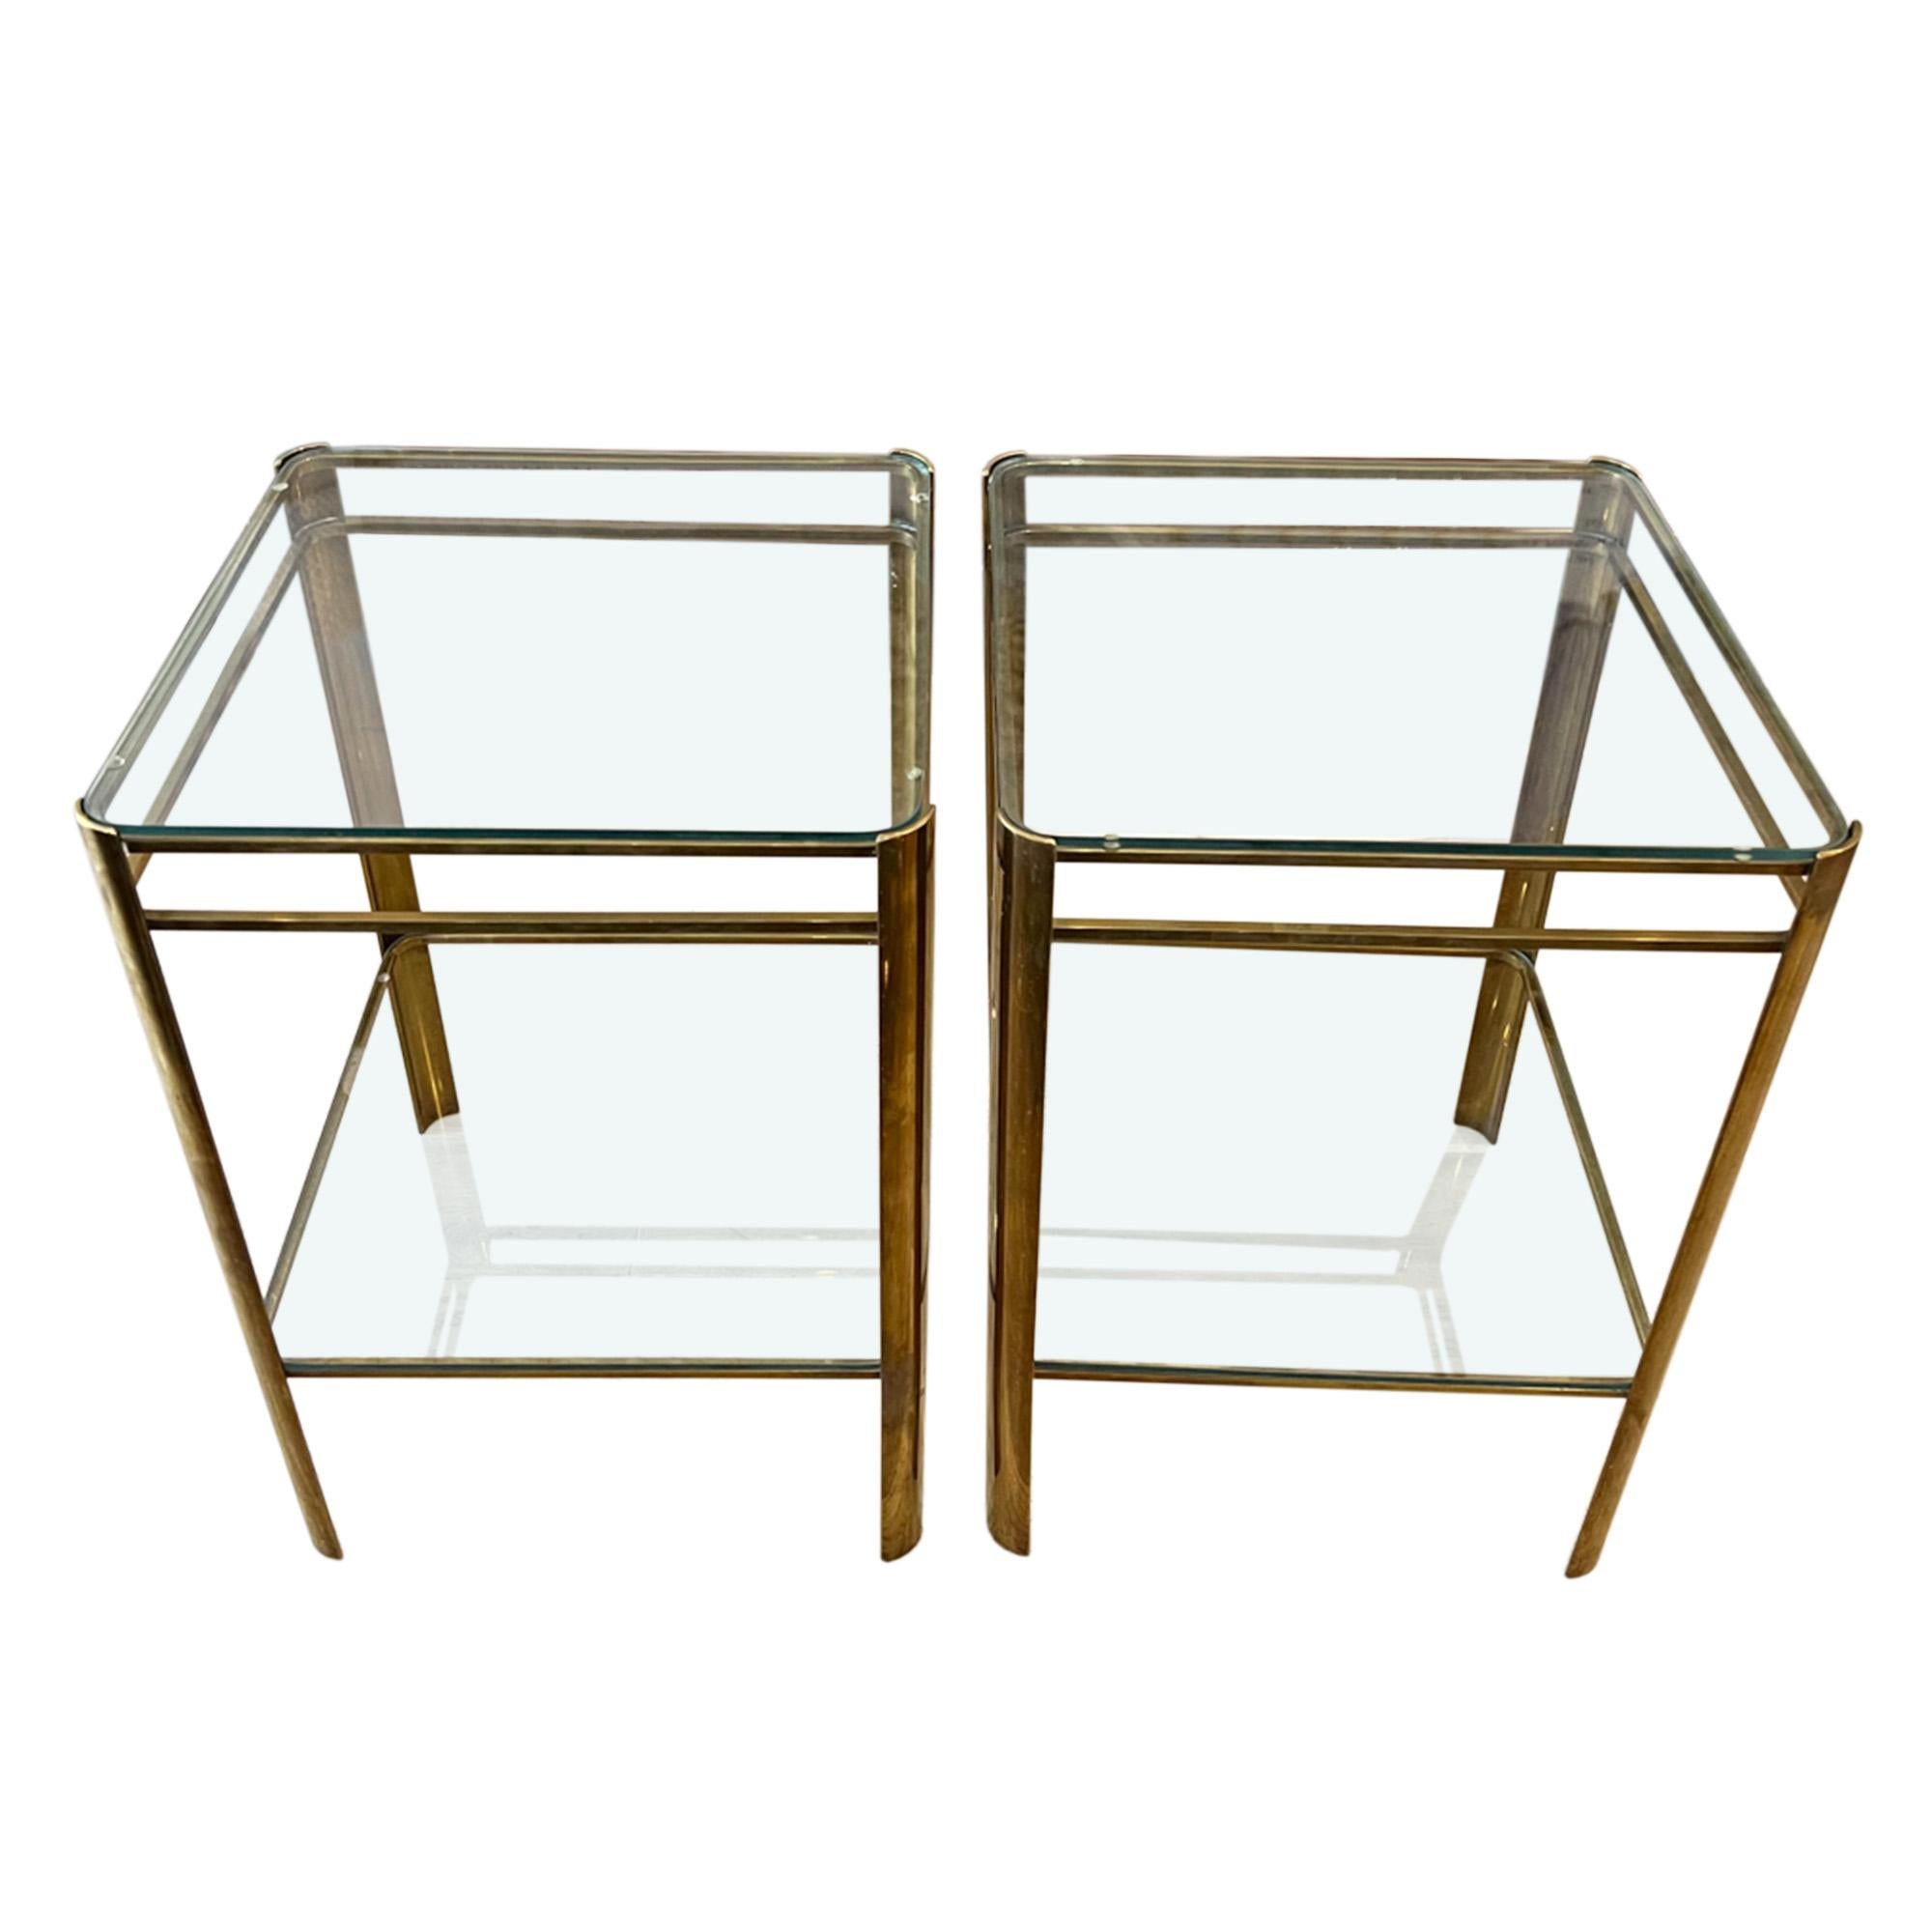 This is a really stylish pair of mid century side tables, designed by Jacques Quinet in Paris in the 1960s. Both signed and stamped. 

It's unusual to find a pair of this size.

Jacques Quinet was one of the most successful designers of the mid